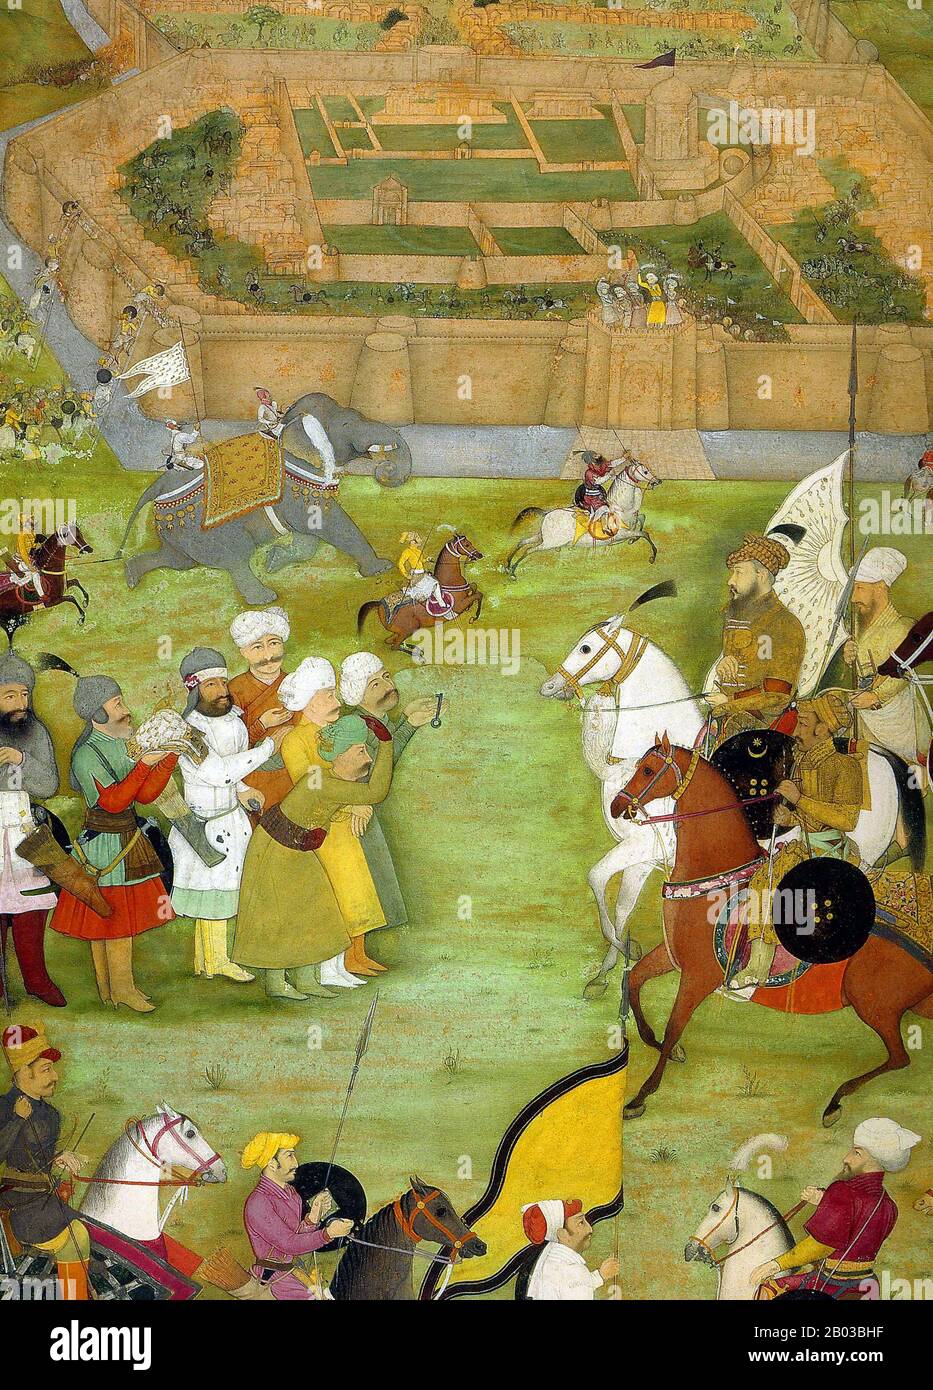 The Padshahnama is a genre of works written to visually record the reign of Mughal Emperor Shah Jahan (5 January 1592  – 22 January 1666). The historical volumes were written by multiple authors, including Muhammad Amin Qazvini, Jalaluddin Tabatabai and Abdul Hamid Lahori, the latter having written the most significant works of the genre. Stock Photo